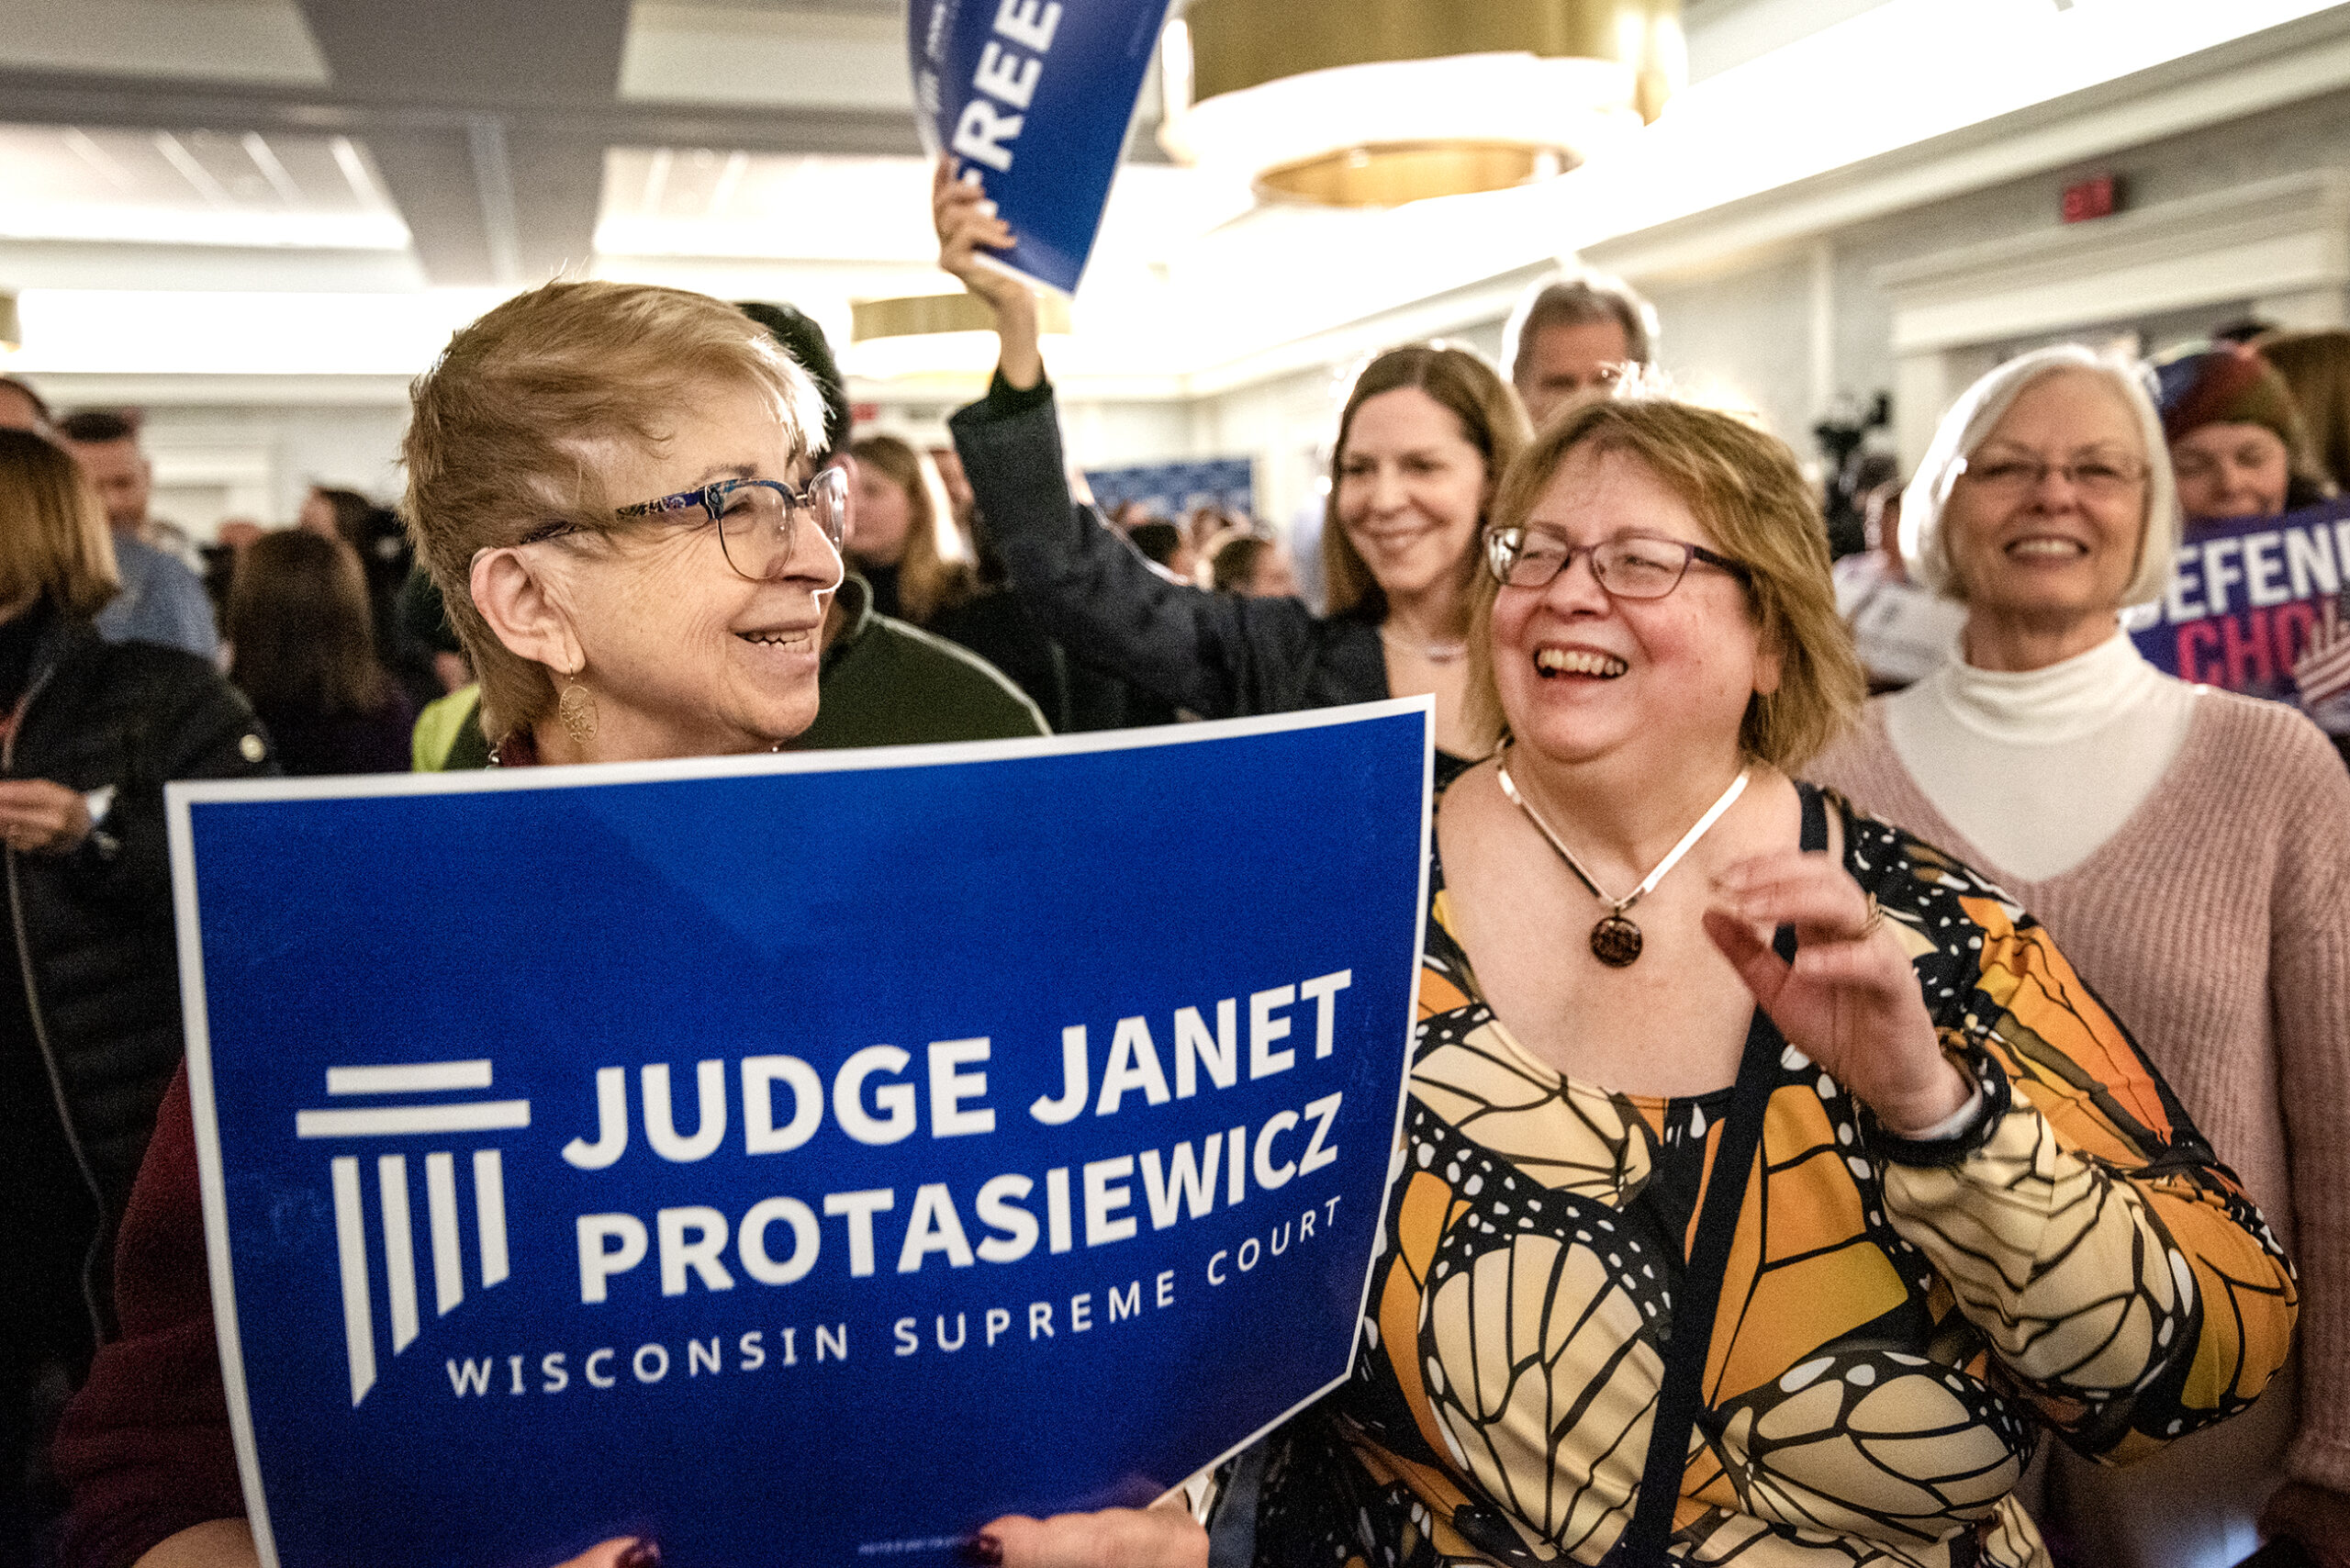 Two women stands together. One holds a blue sign for Judge Janet Protasiewicz